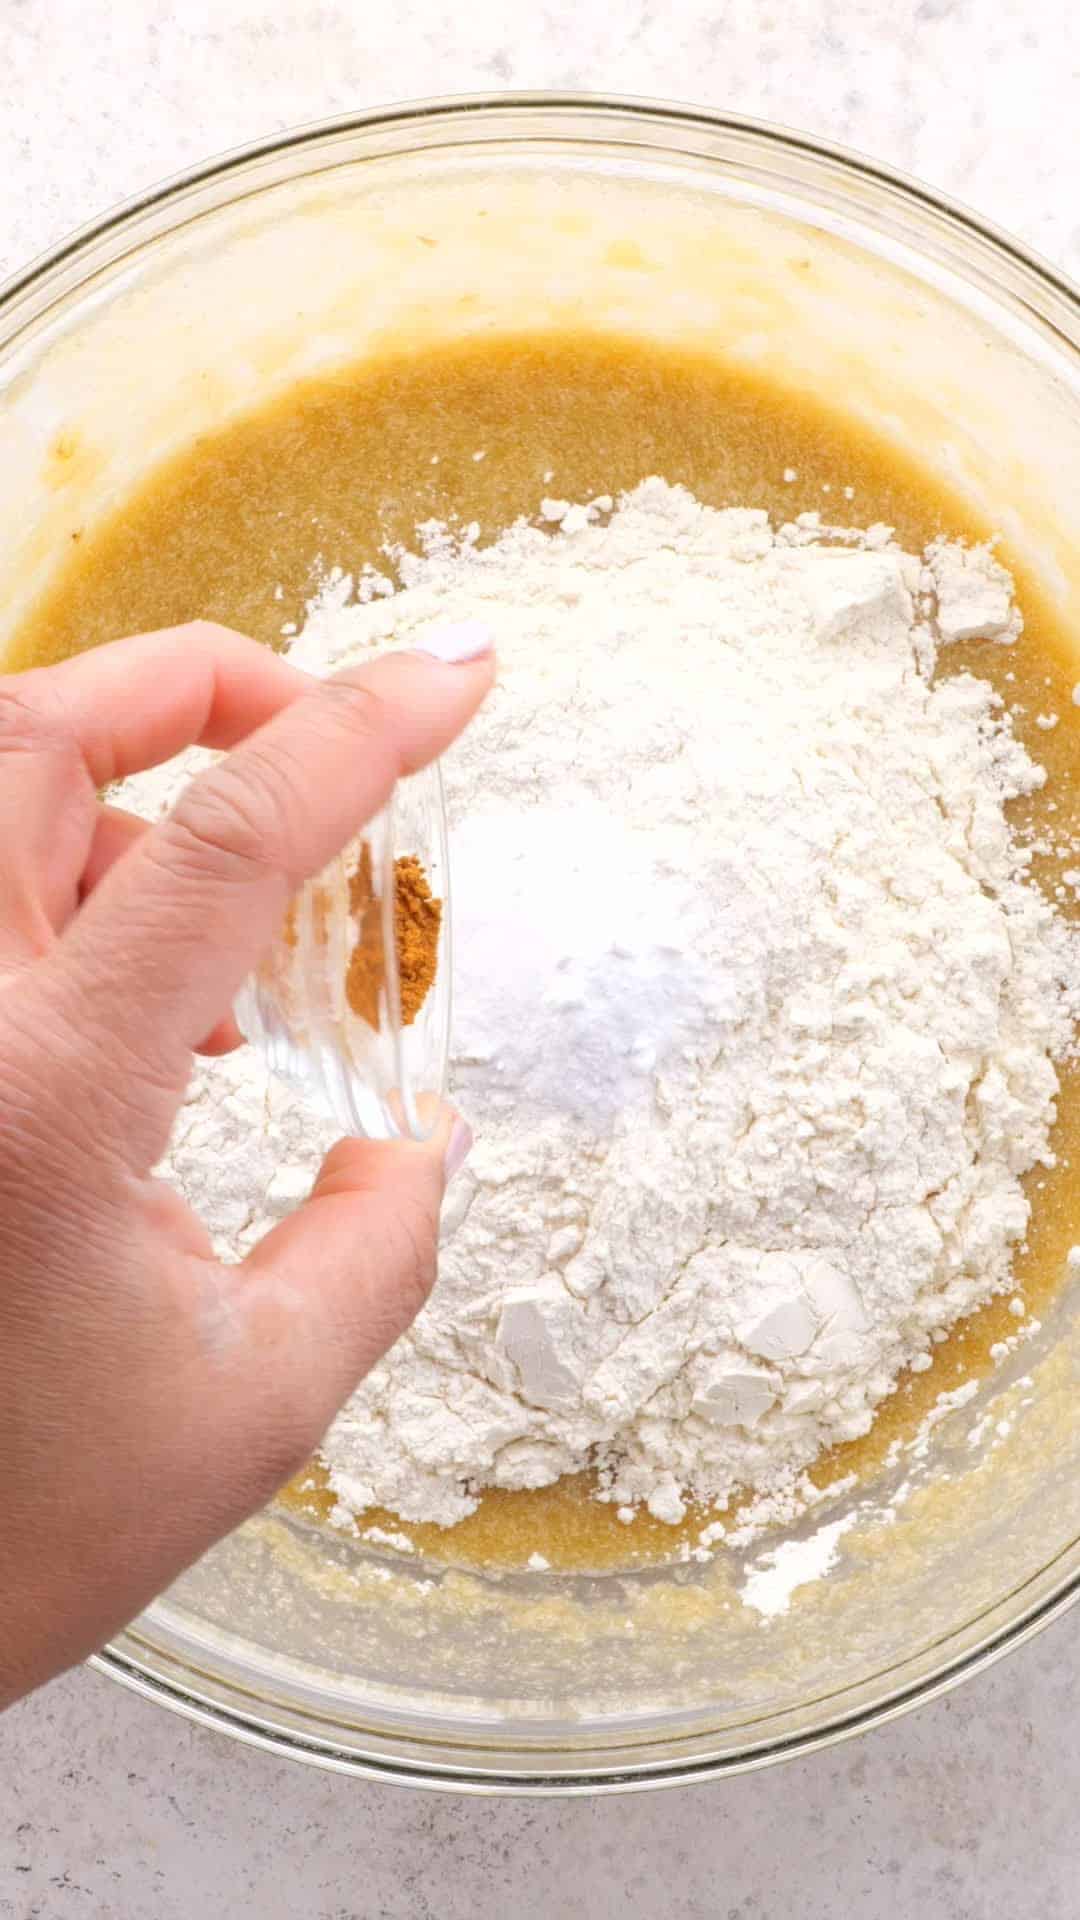 Dry ingredients being added to a bowl of tan colored batter